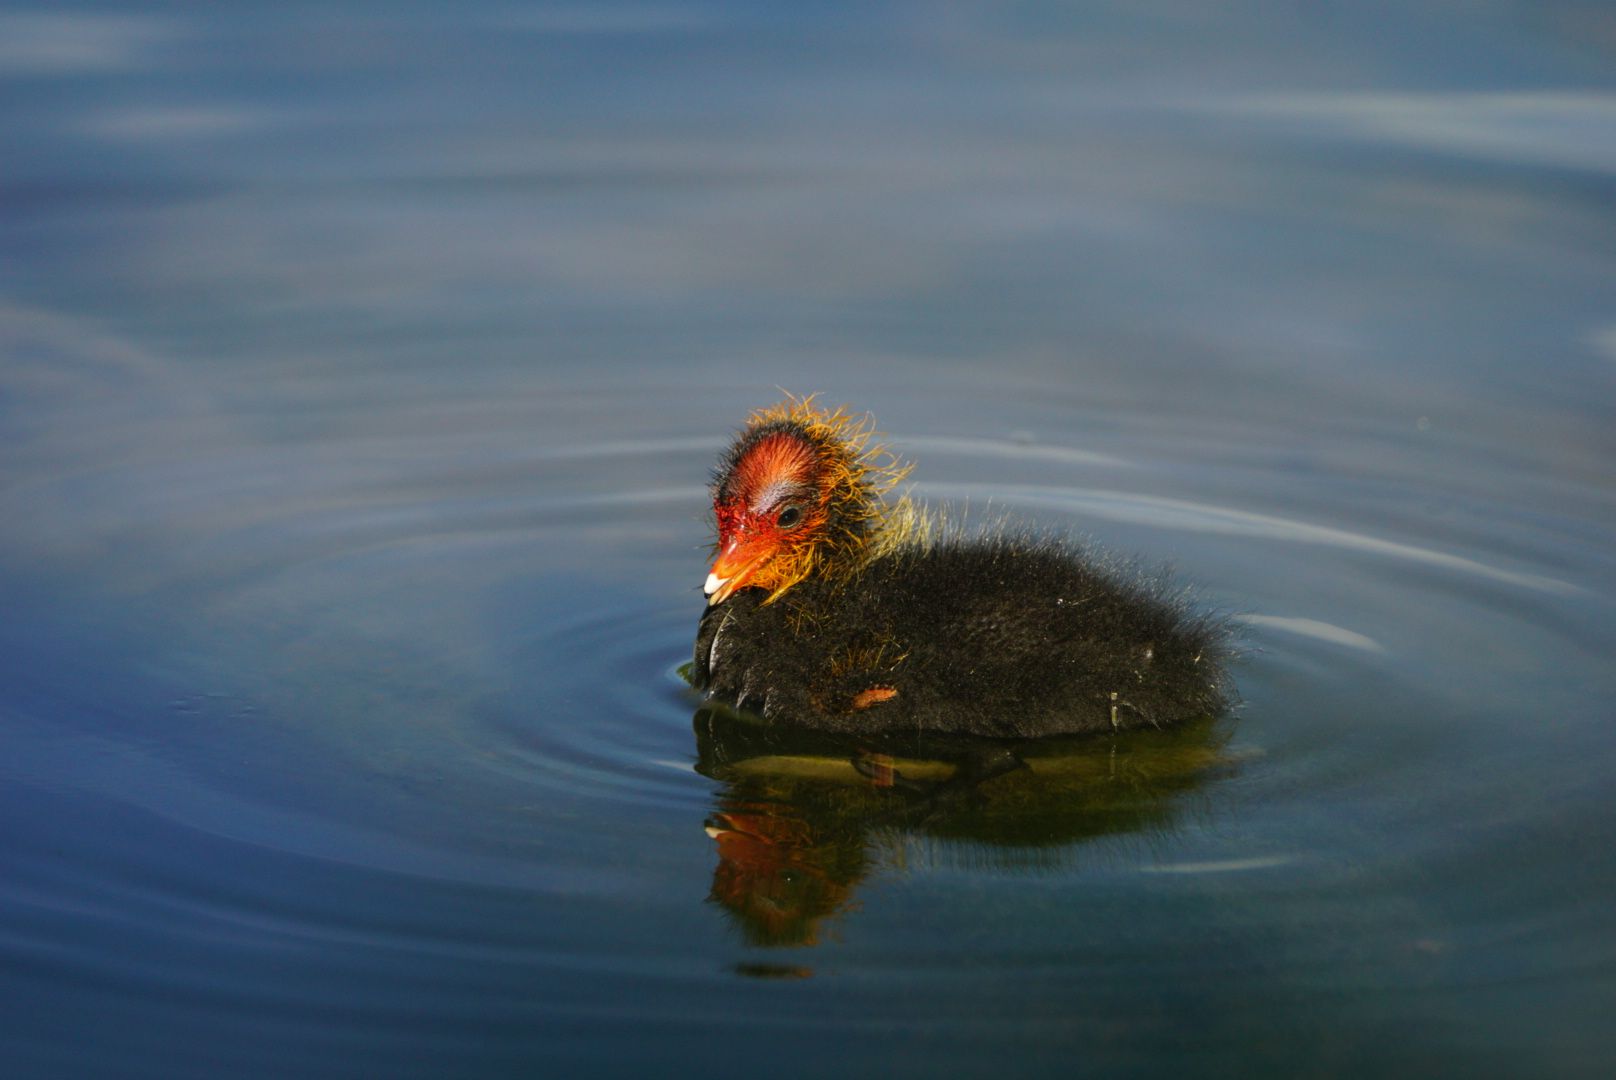 Coot (chick) at sunset...